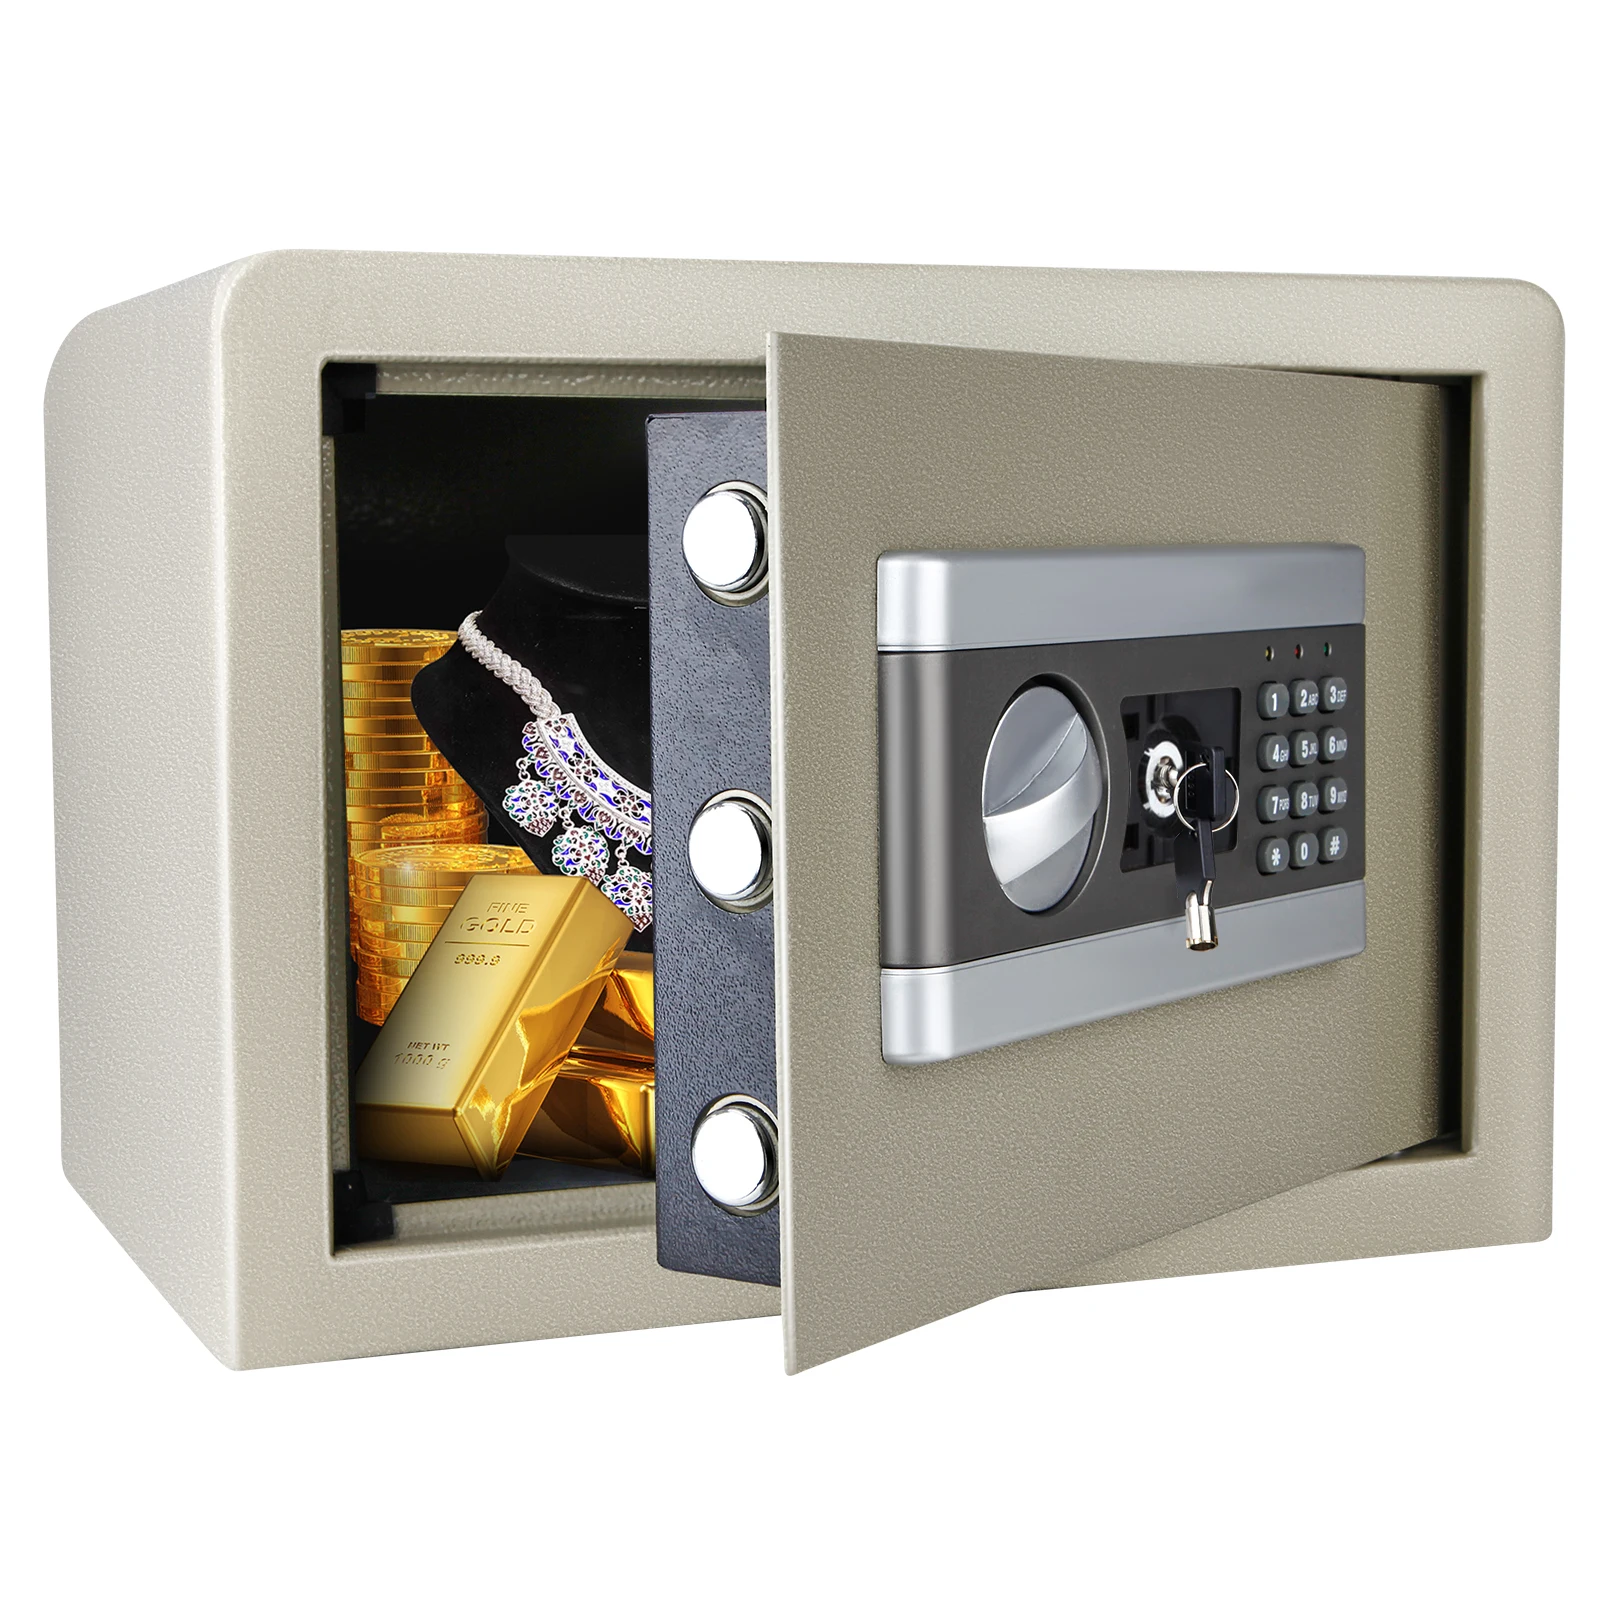 

0.8CUB Confidential File Cabinet Electronic Digital Password Safe All Steel In-Wall Home Office Money Jewelry File Safe Lock Box